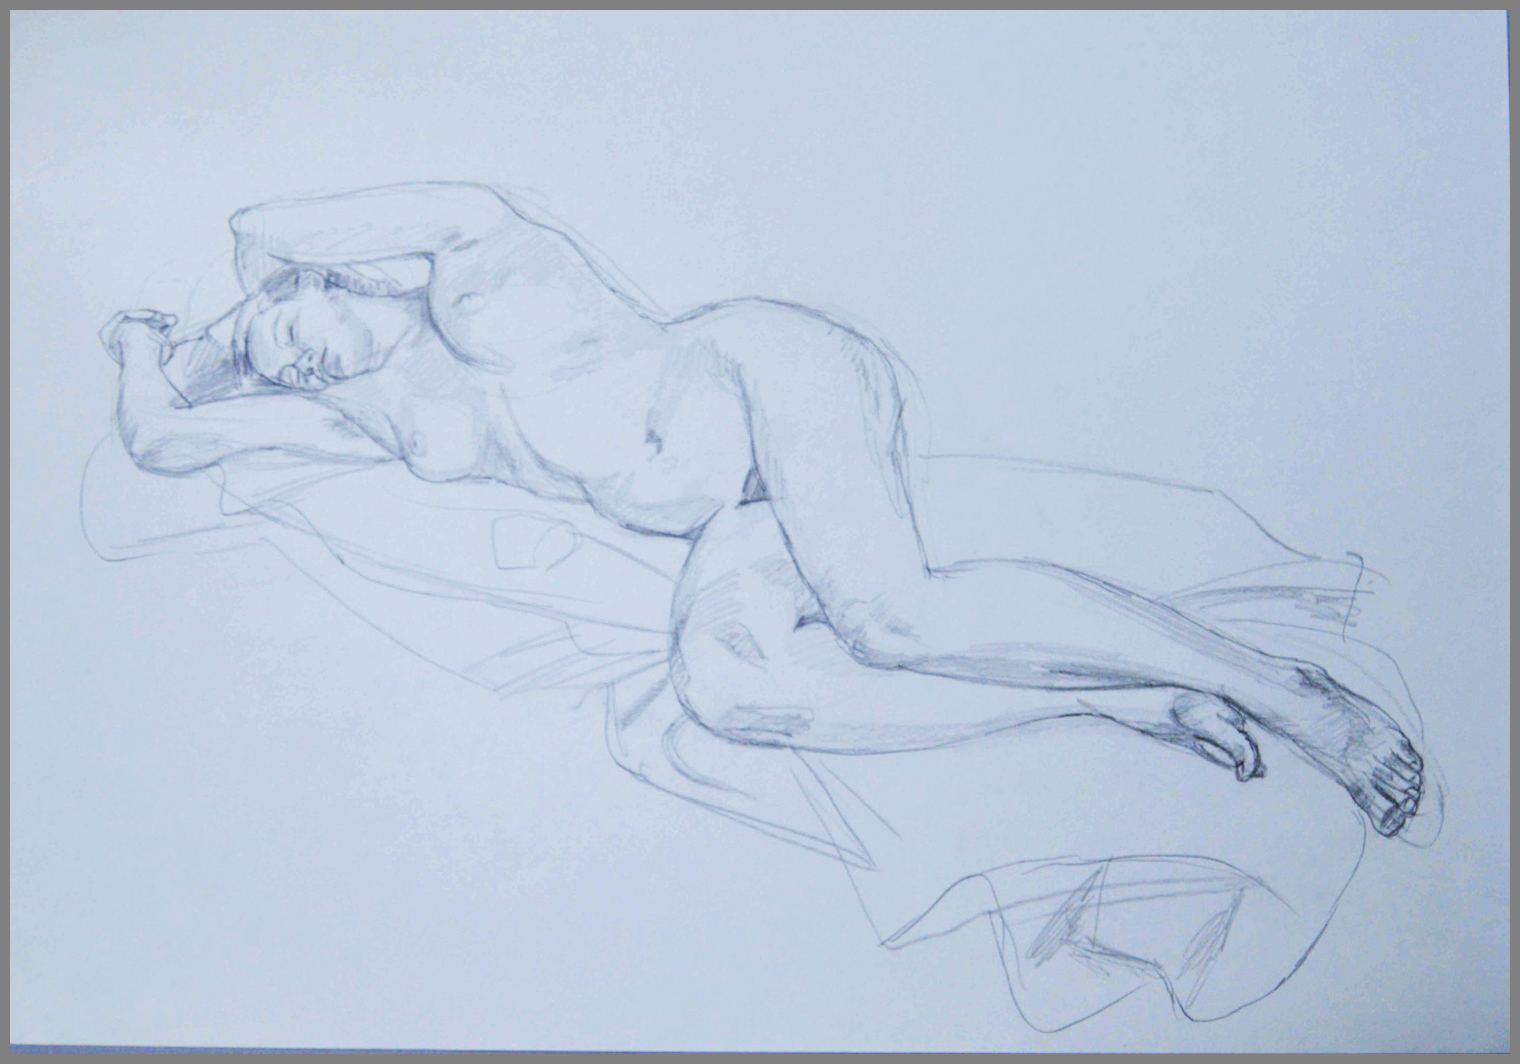  Reclining Nude, pencil, 18 x 24 inches 